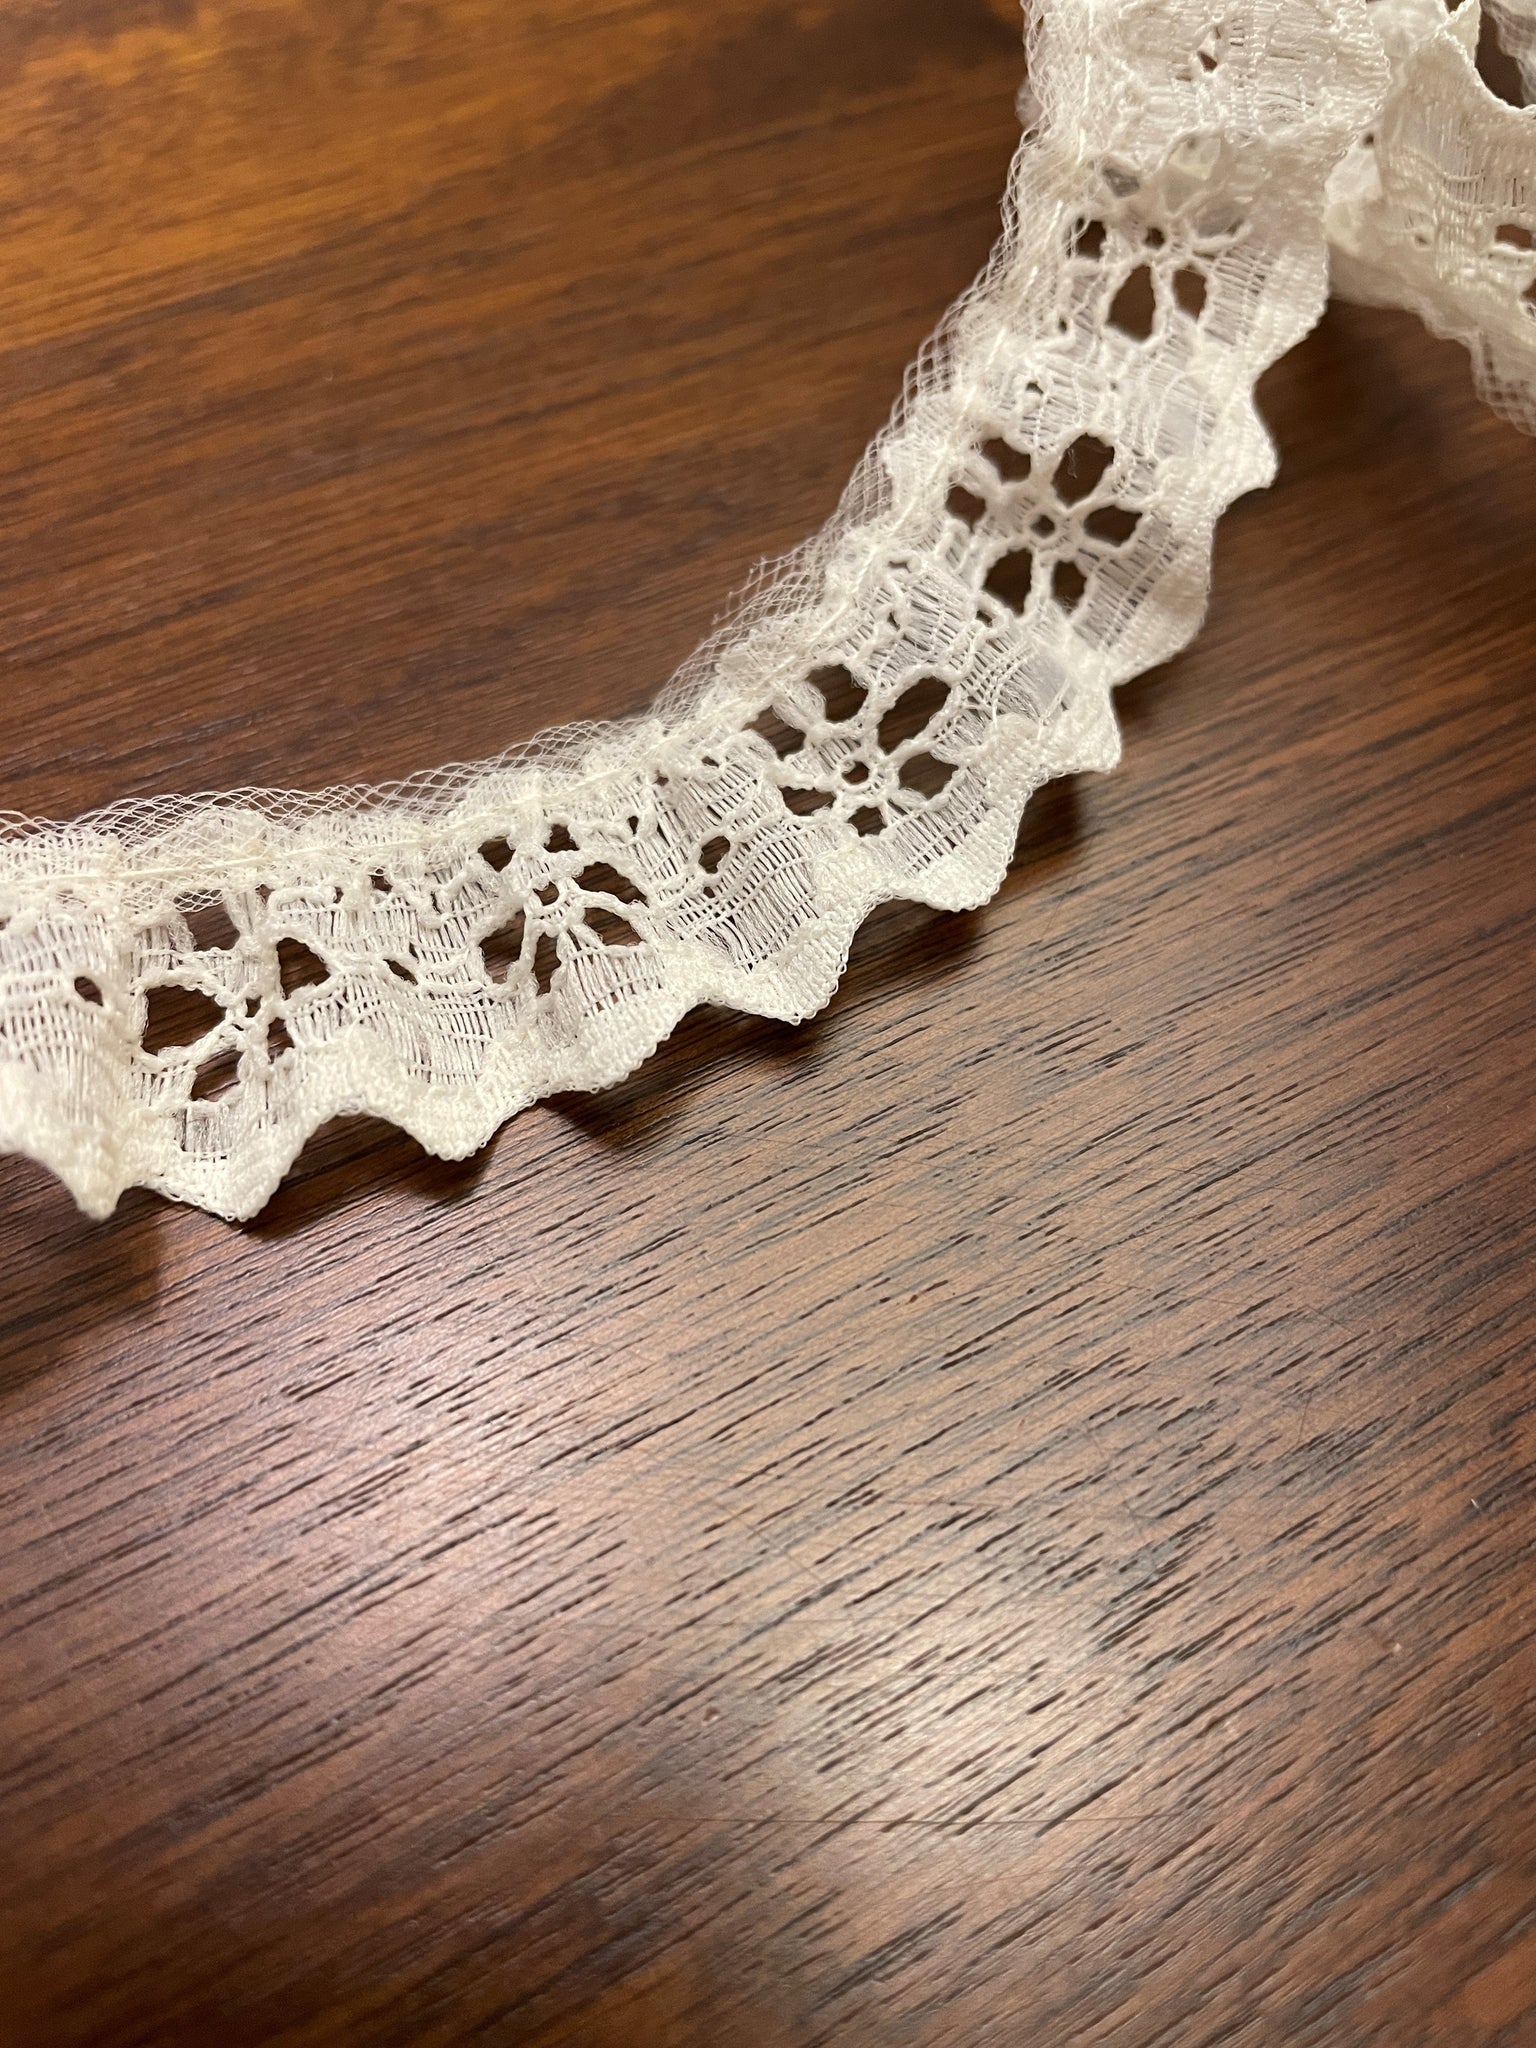 4 YD Ruffled Lace By the Yard - Off White with Scalloped Edge